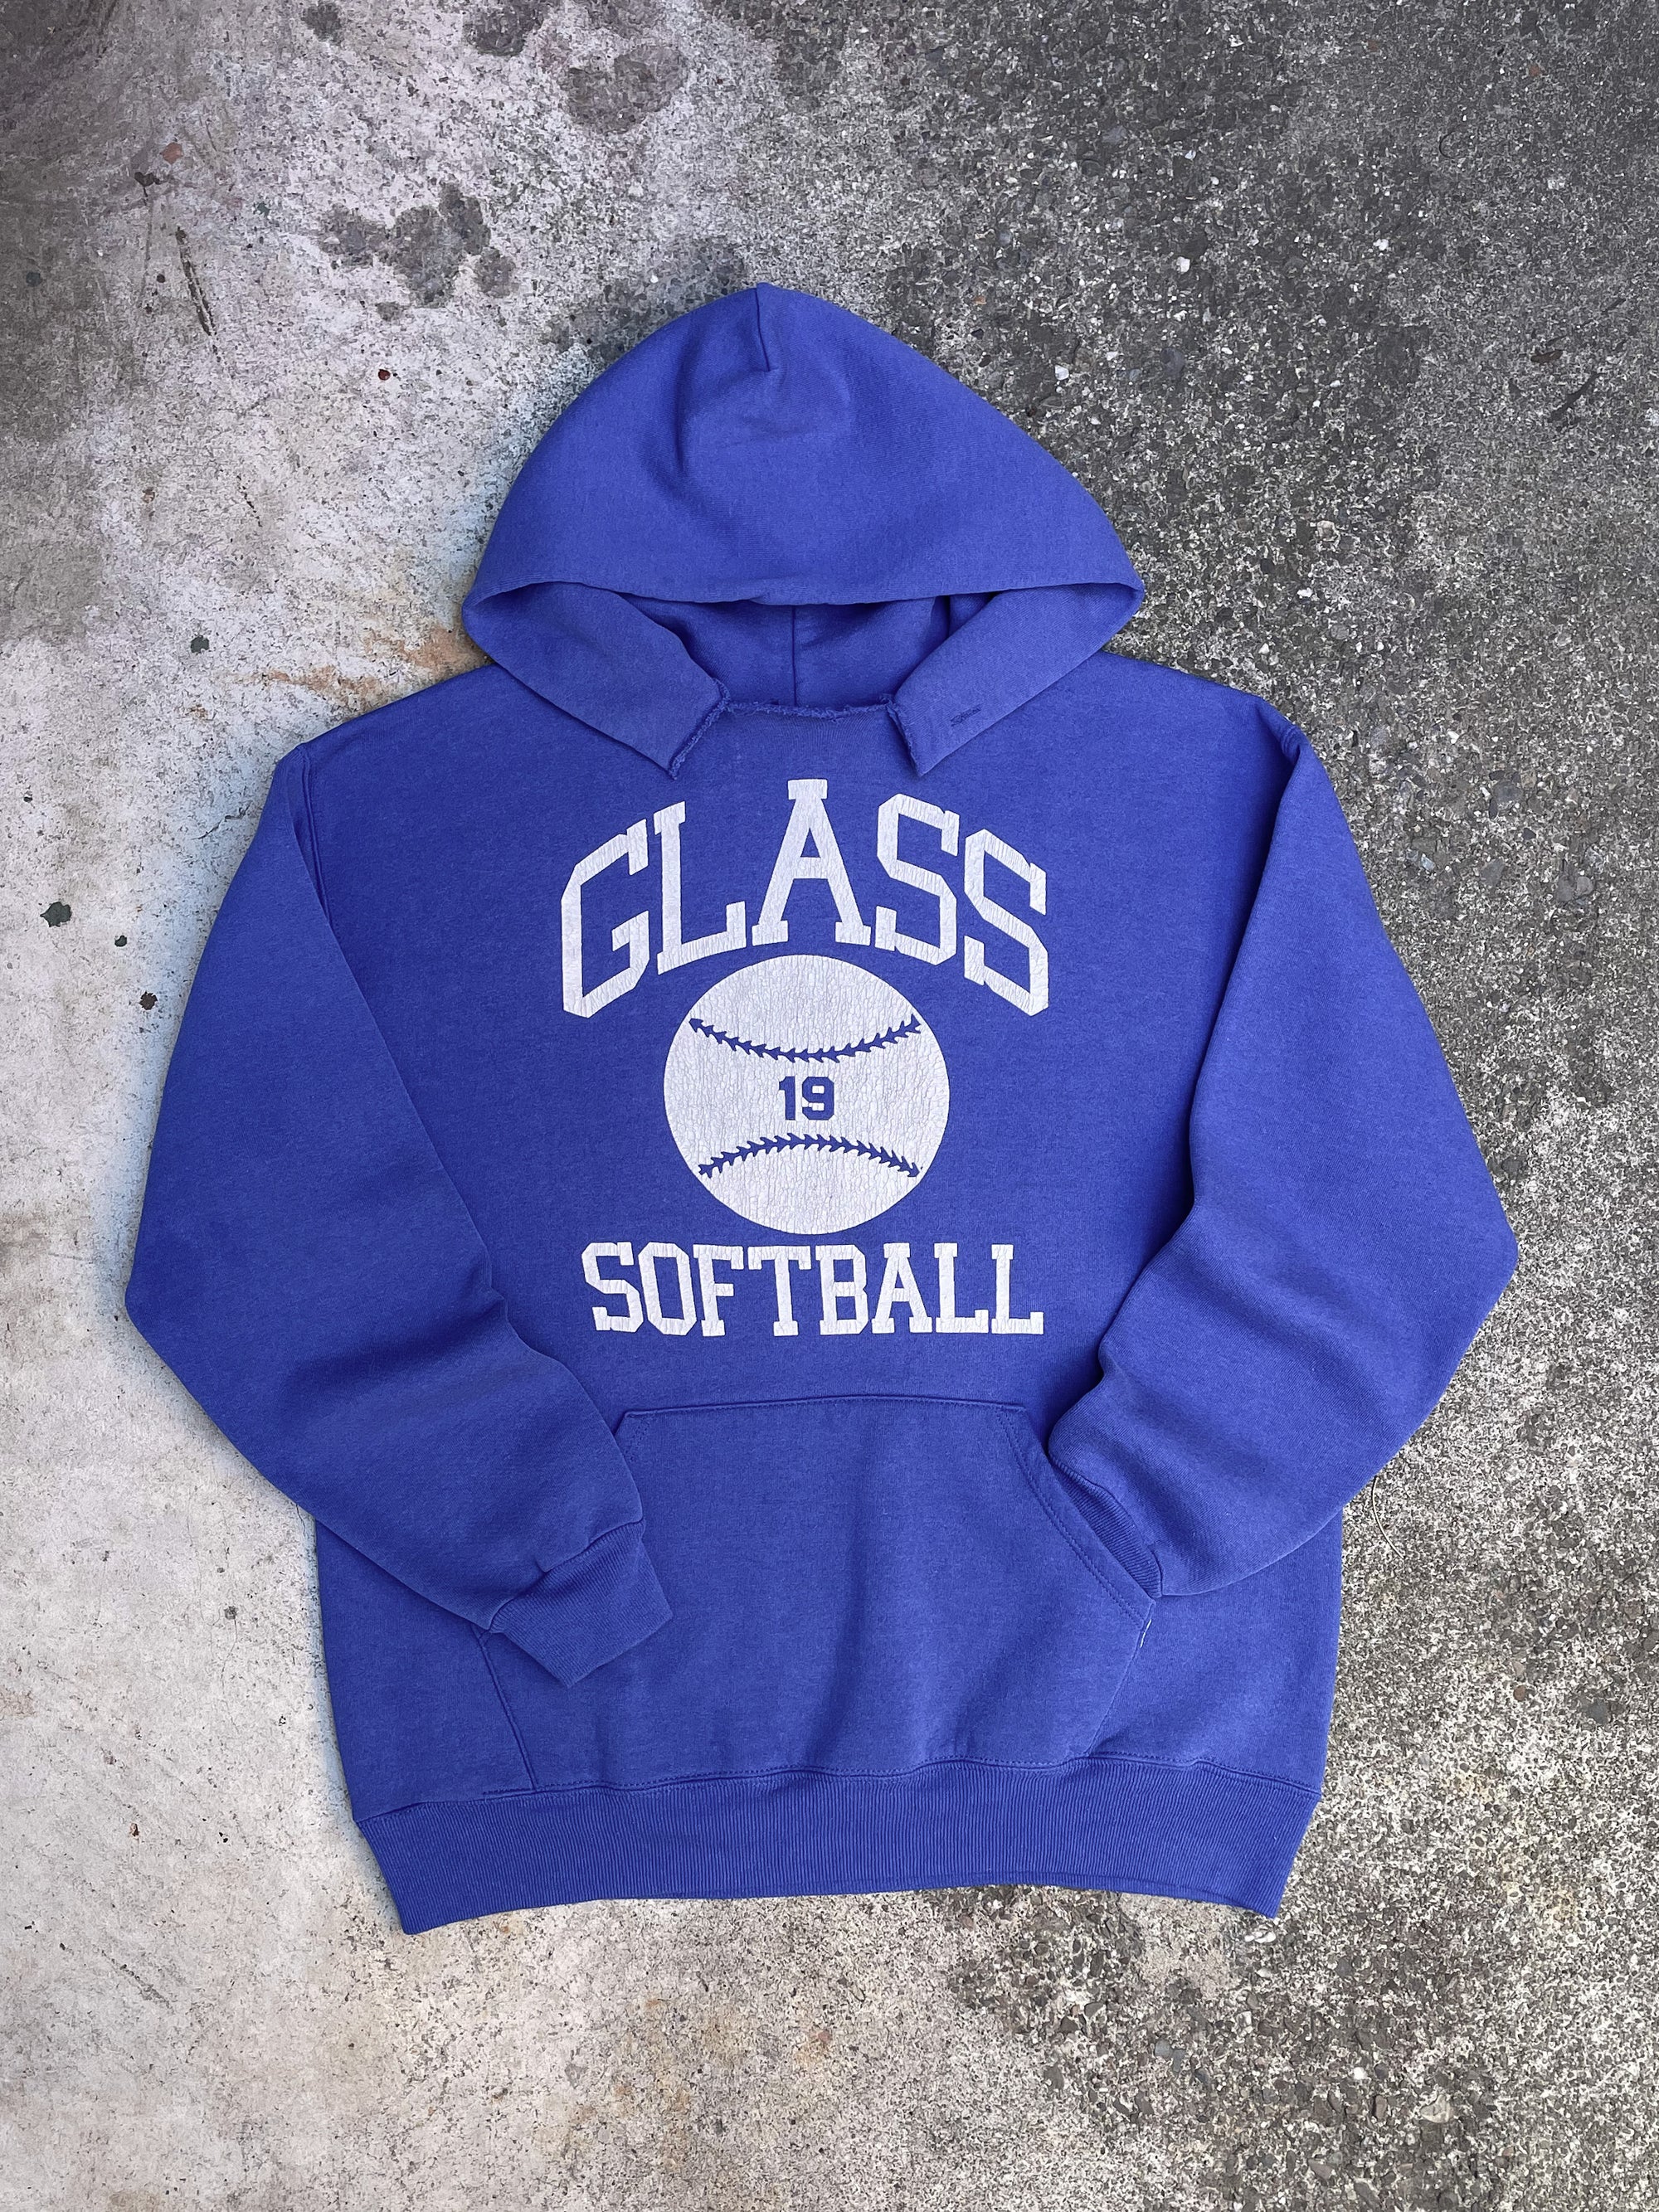 1990s Russell “Glass Softball” Distressed Hoodie (L)